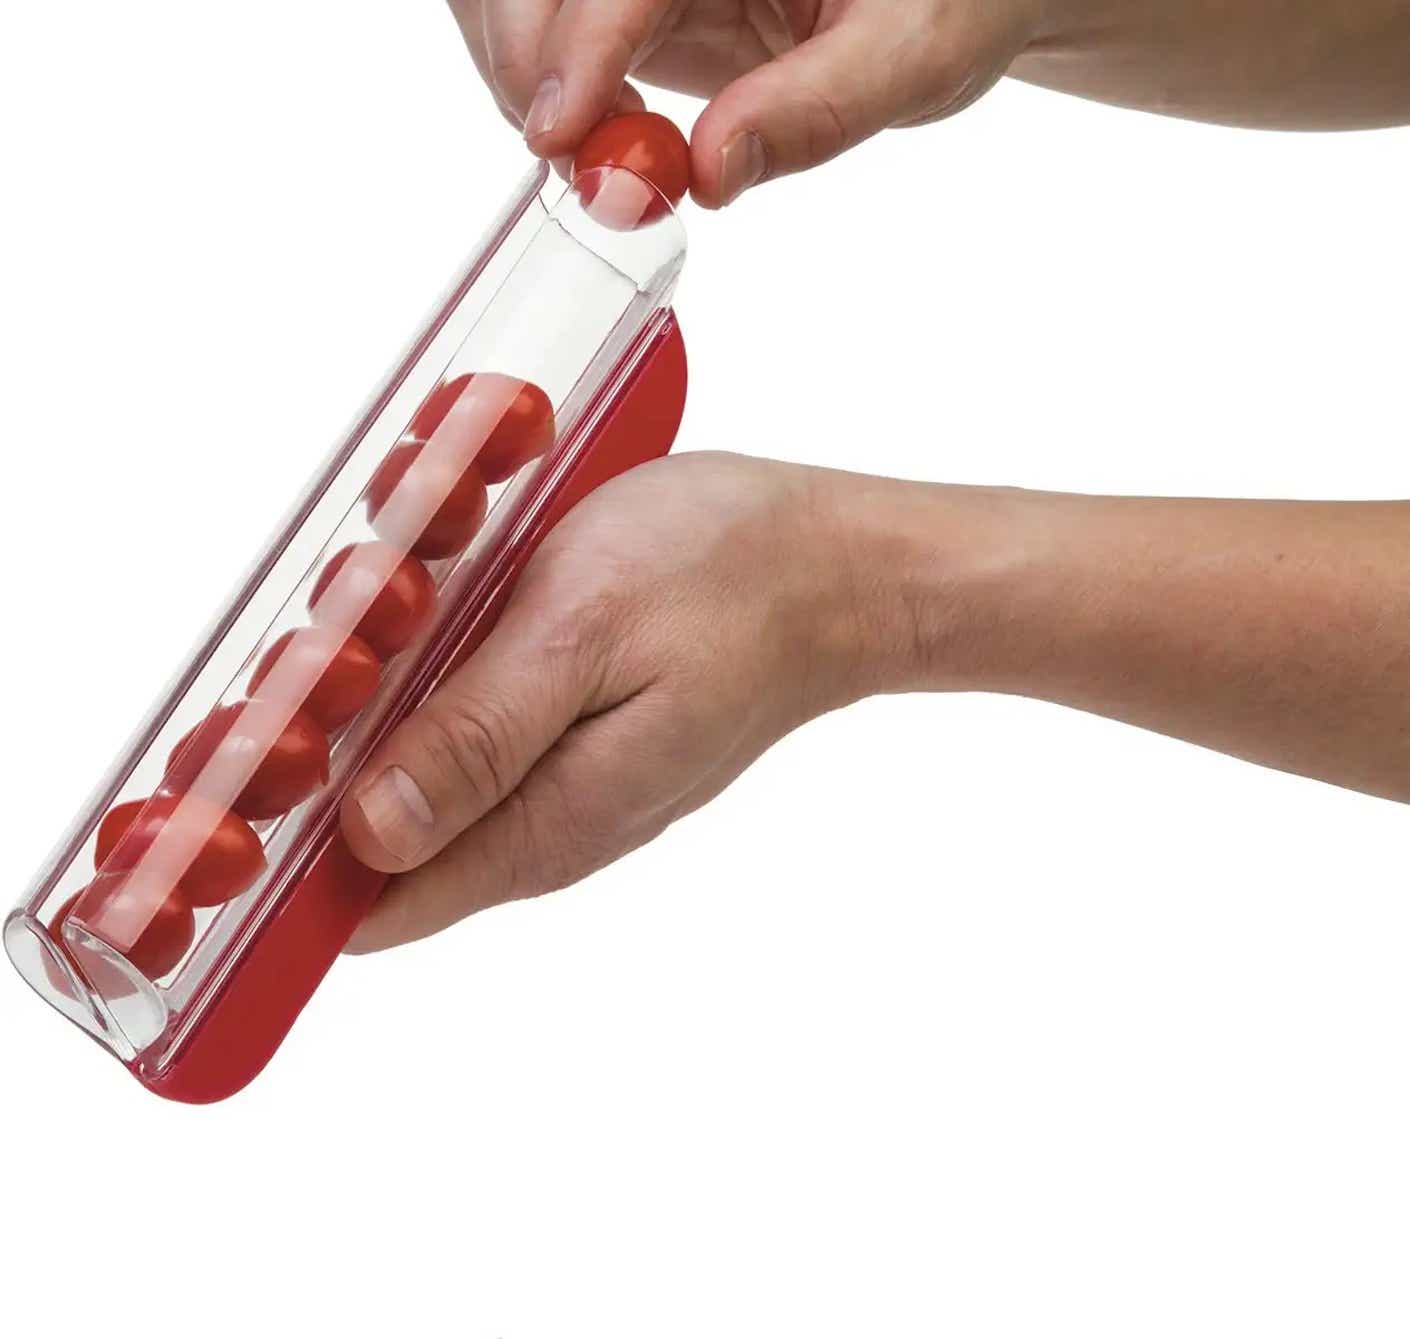 A hand places a row of cherry tomatoes into a zip slicer that can cut through all the tomatoes at once.